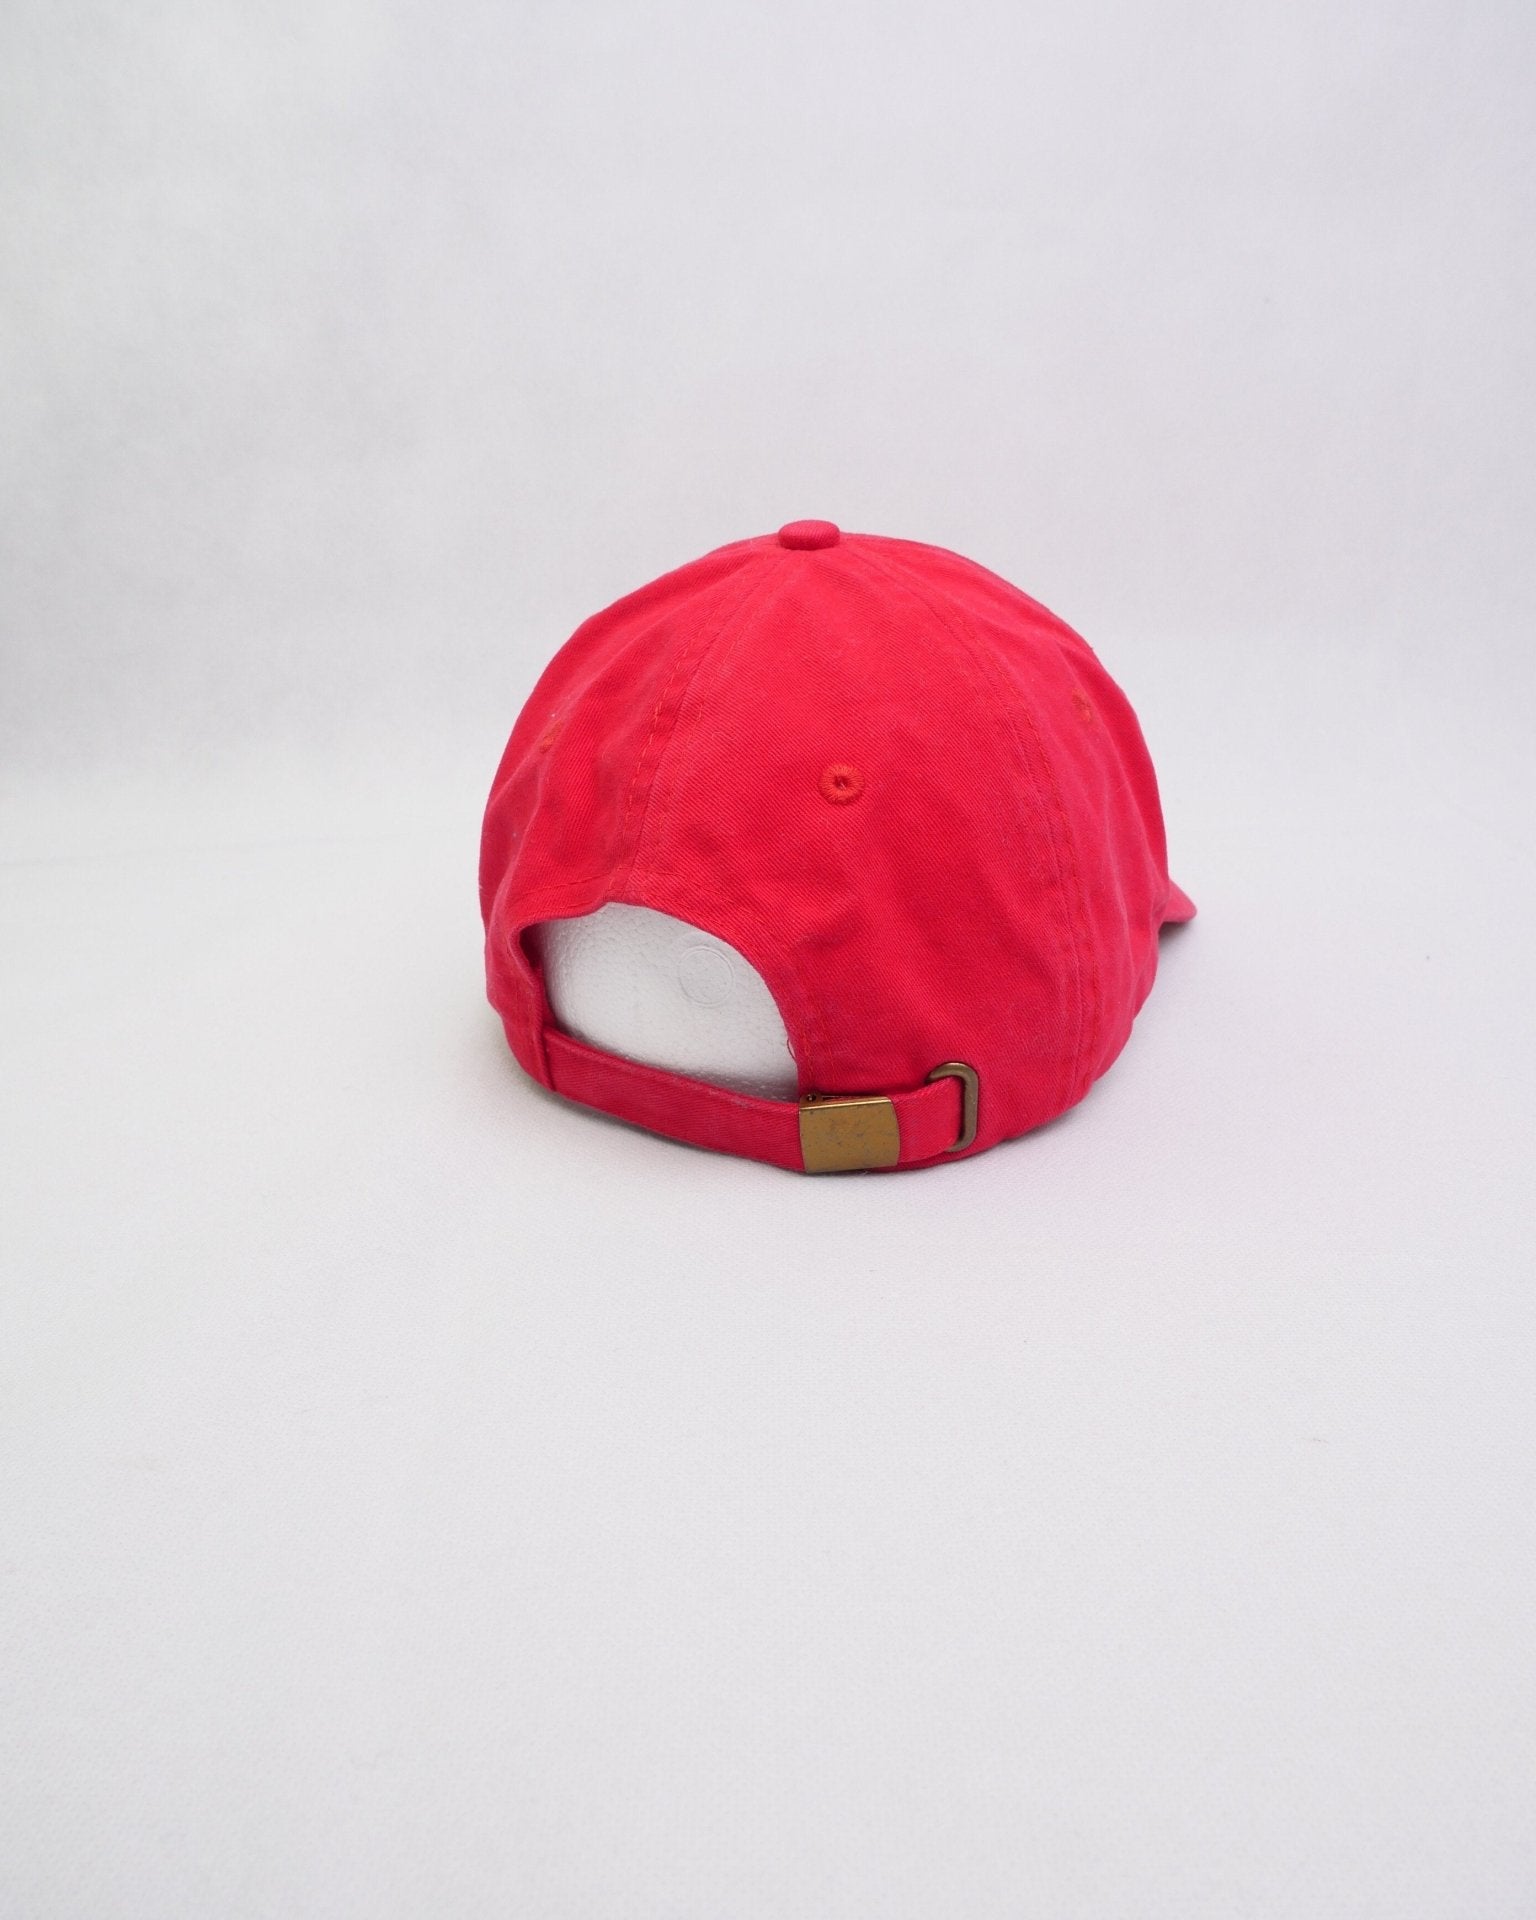 'Sheep' embroidered Logo red Cap Accessoire - Peeces